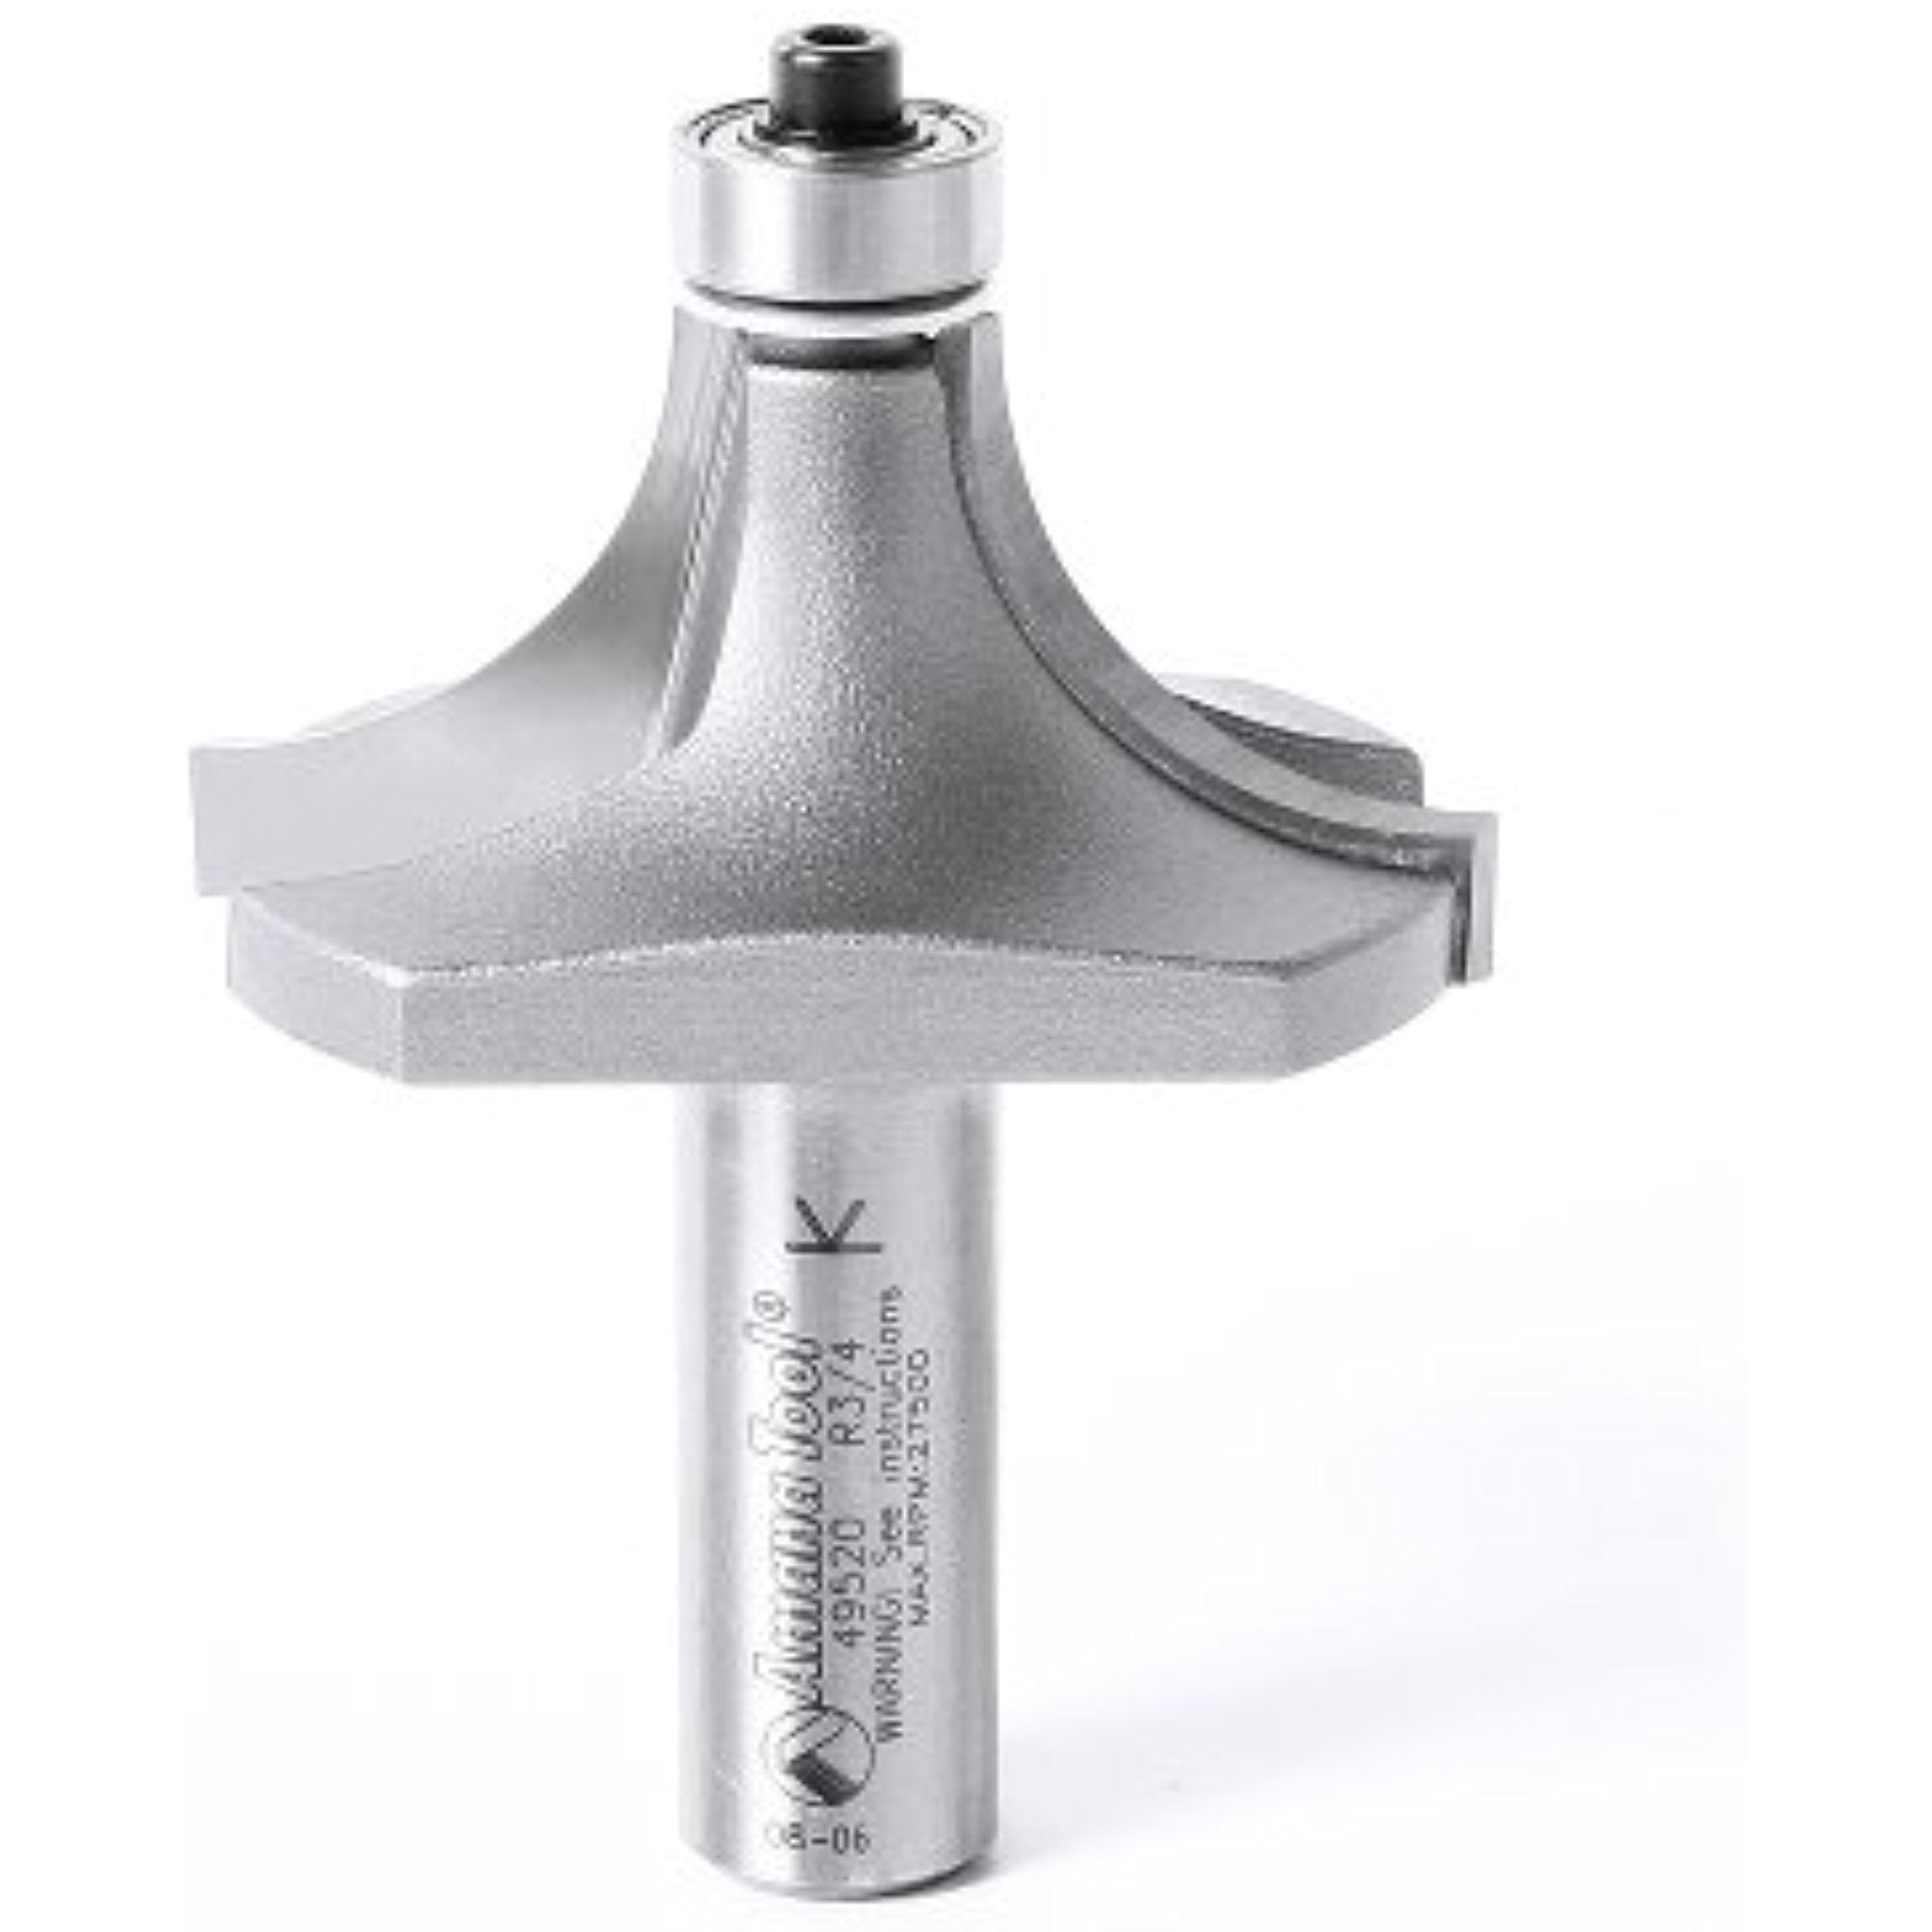 3/4" Diameter Industry Quality HSS Round Over Edging Router Bit 1/2" Shank 